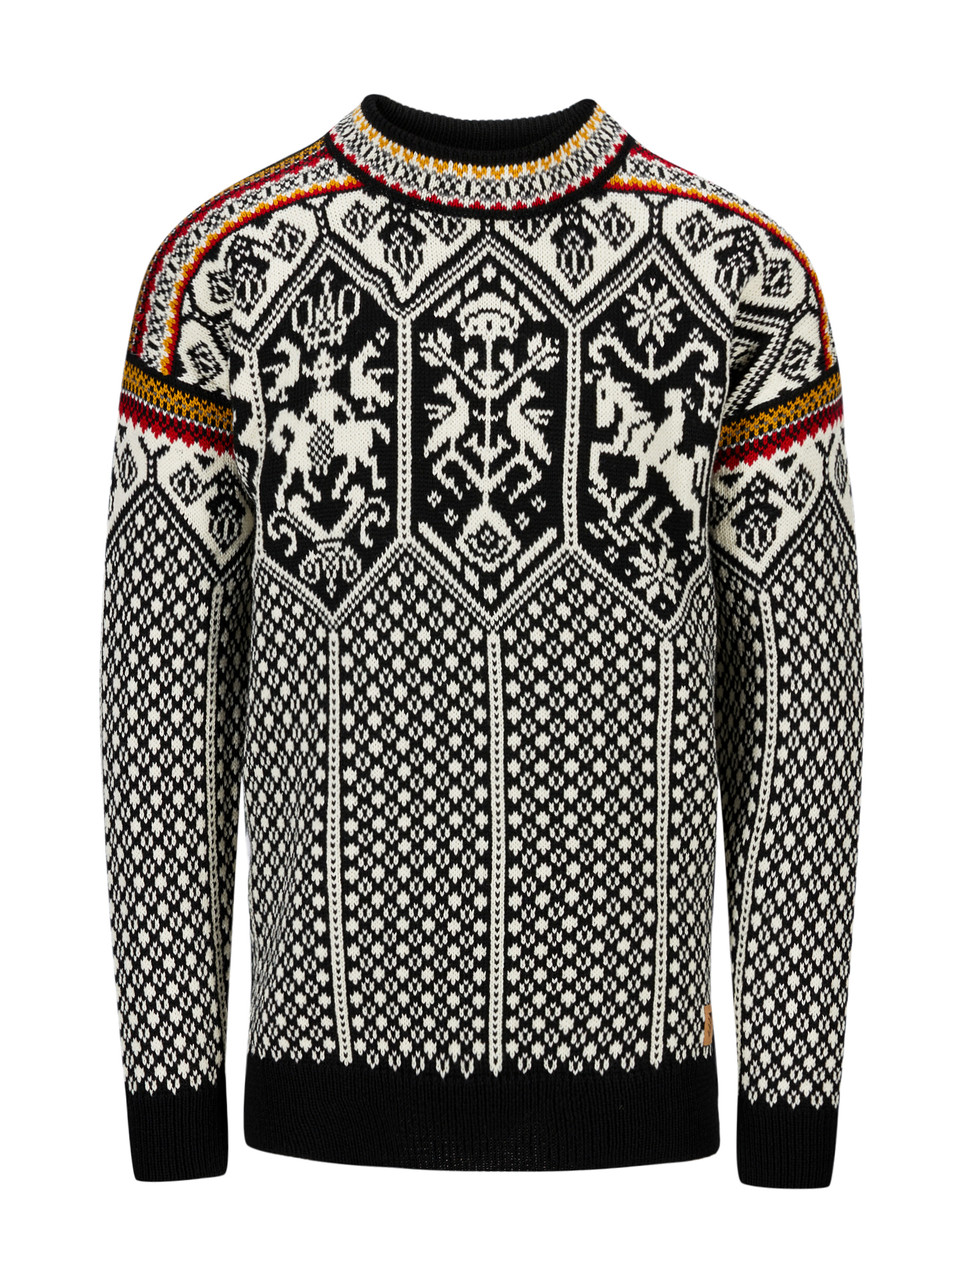 Dale of Norway - 1994 Men's Sweater: Black/Off White/Mustard, 95891-F00 ...